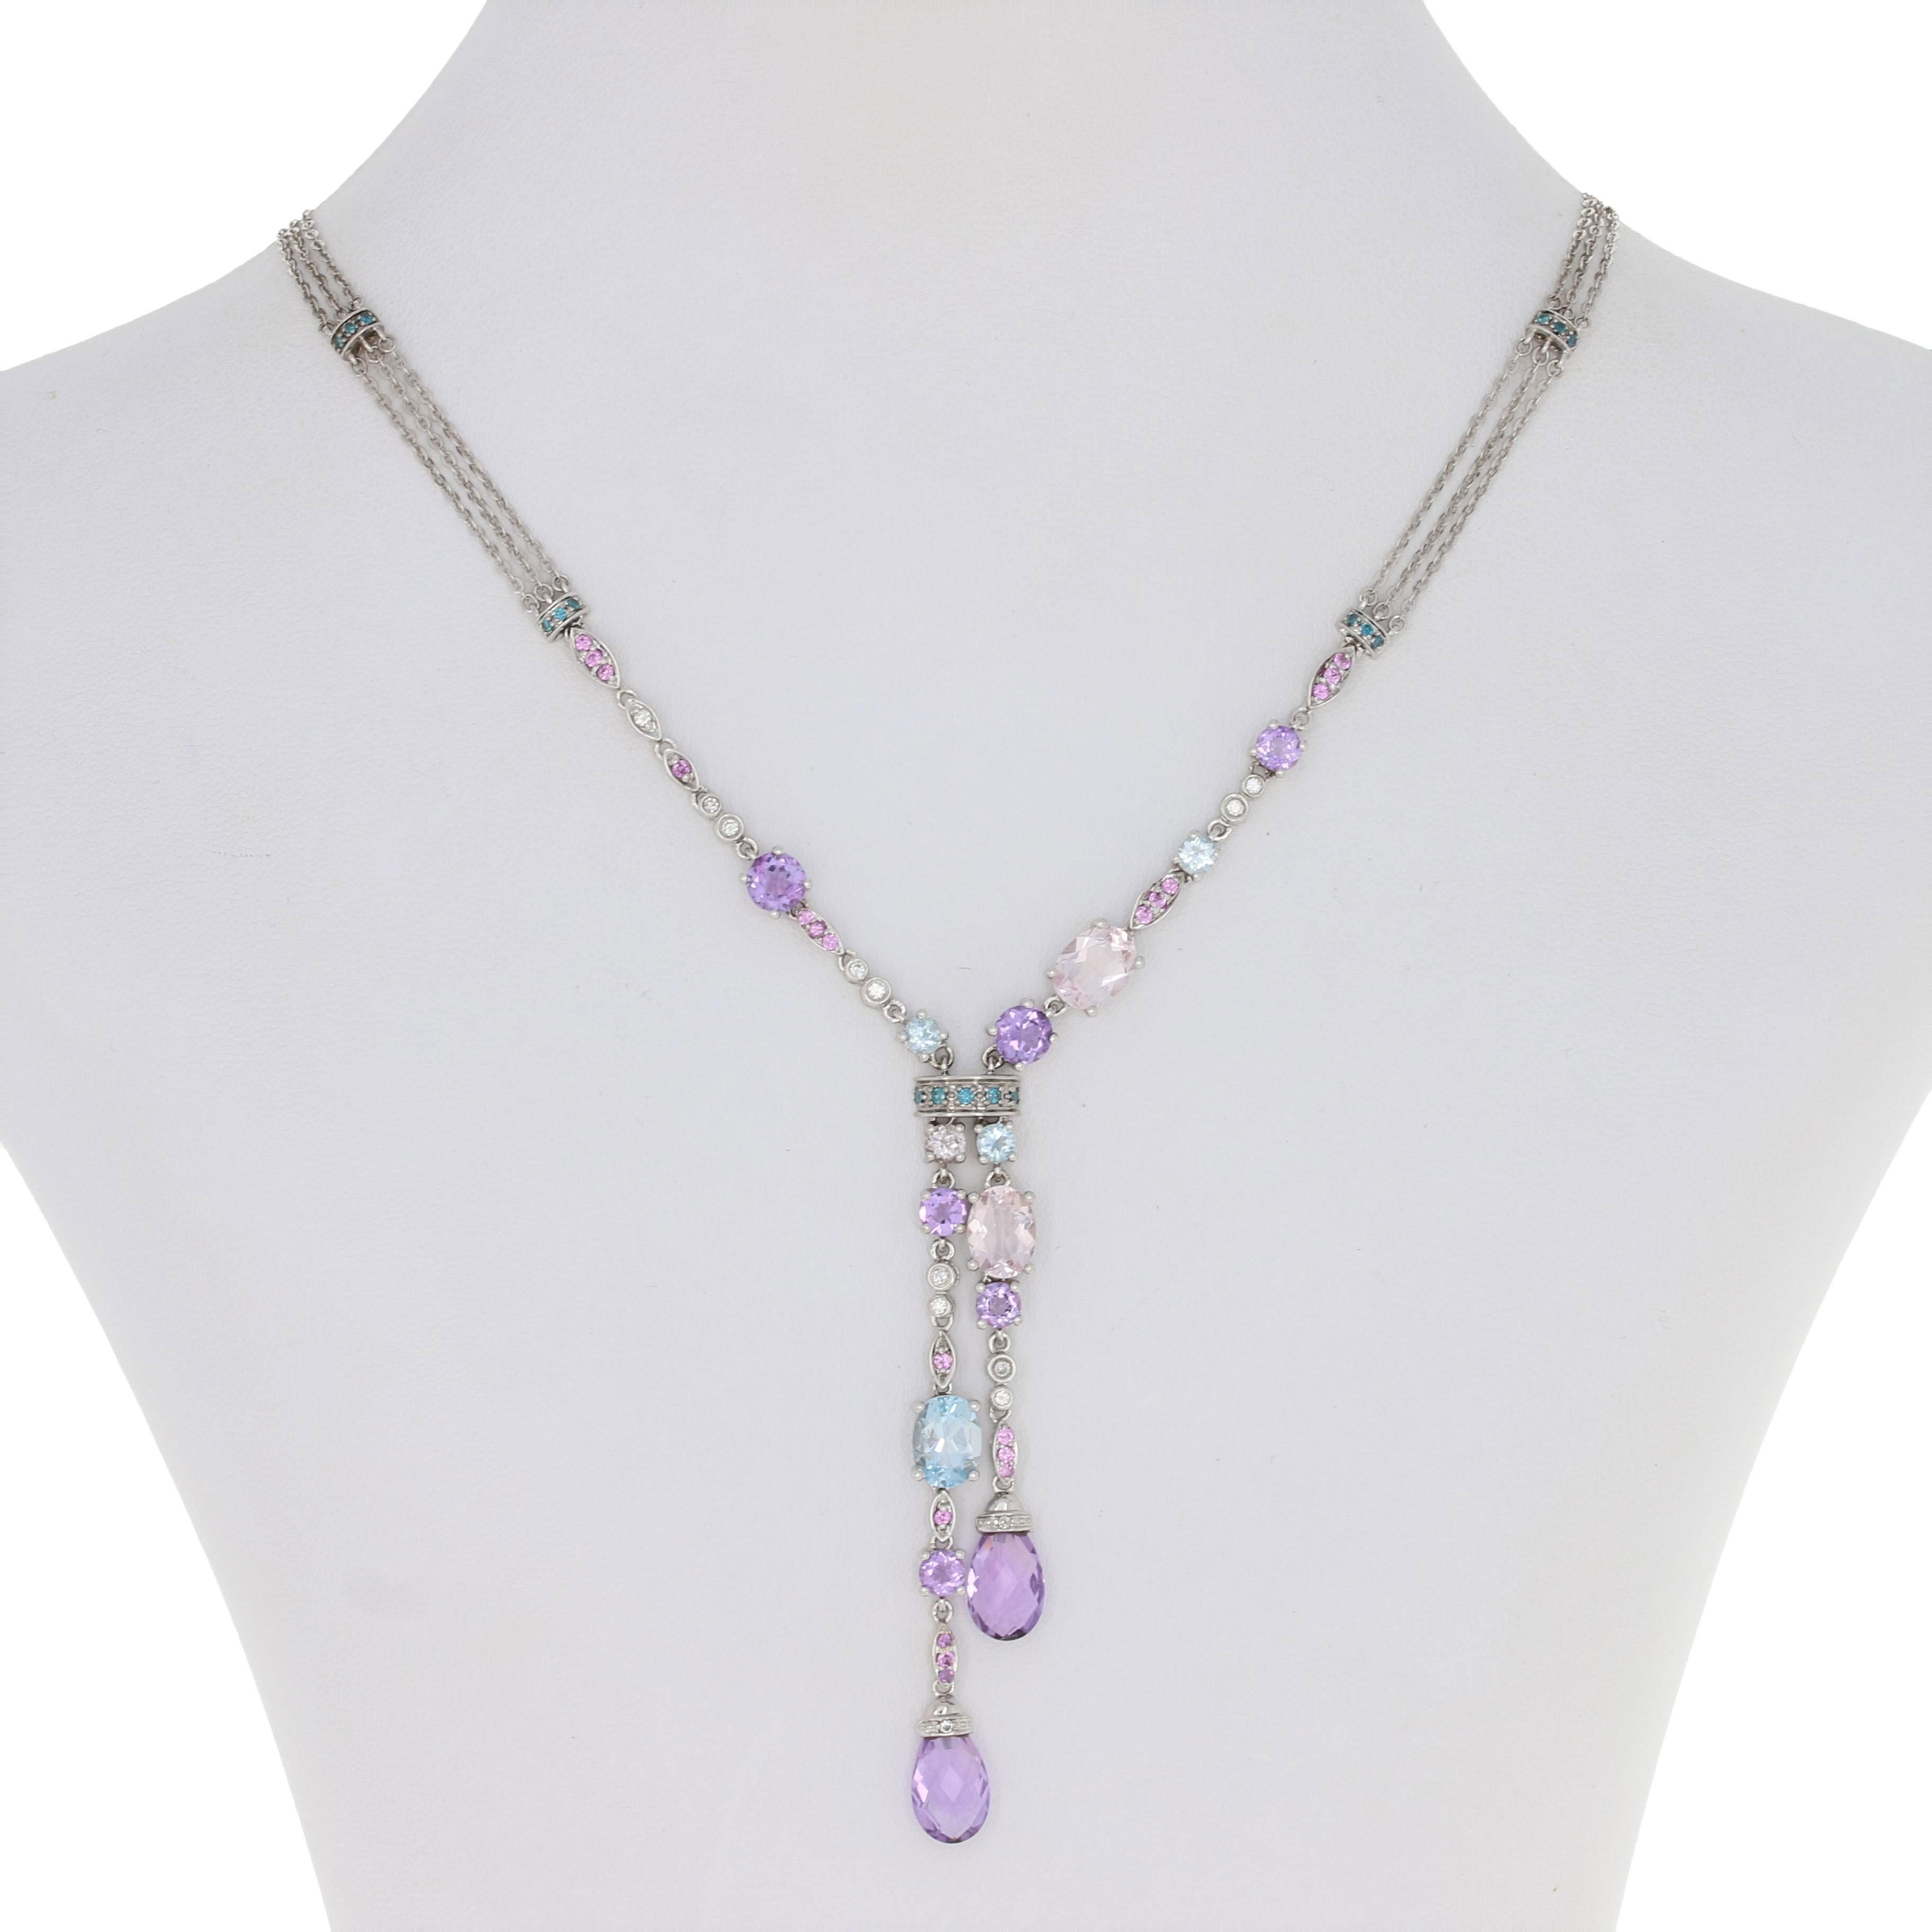 Treat yourself to something sweet with this dazzling creation! Crafted in 18k white gold, this triple-strand cable chain necklace features icy blue topaz, luminous Morganites, vivacious amethysts, glistening pink sapphires, and elegant diamonds